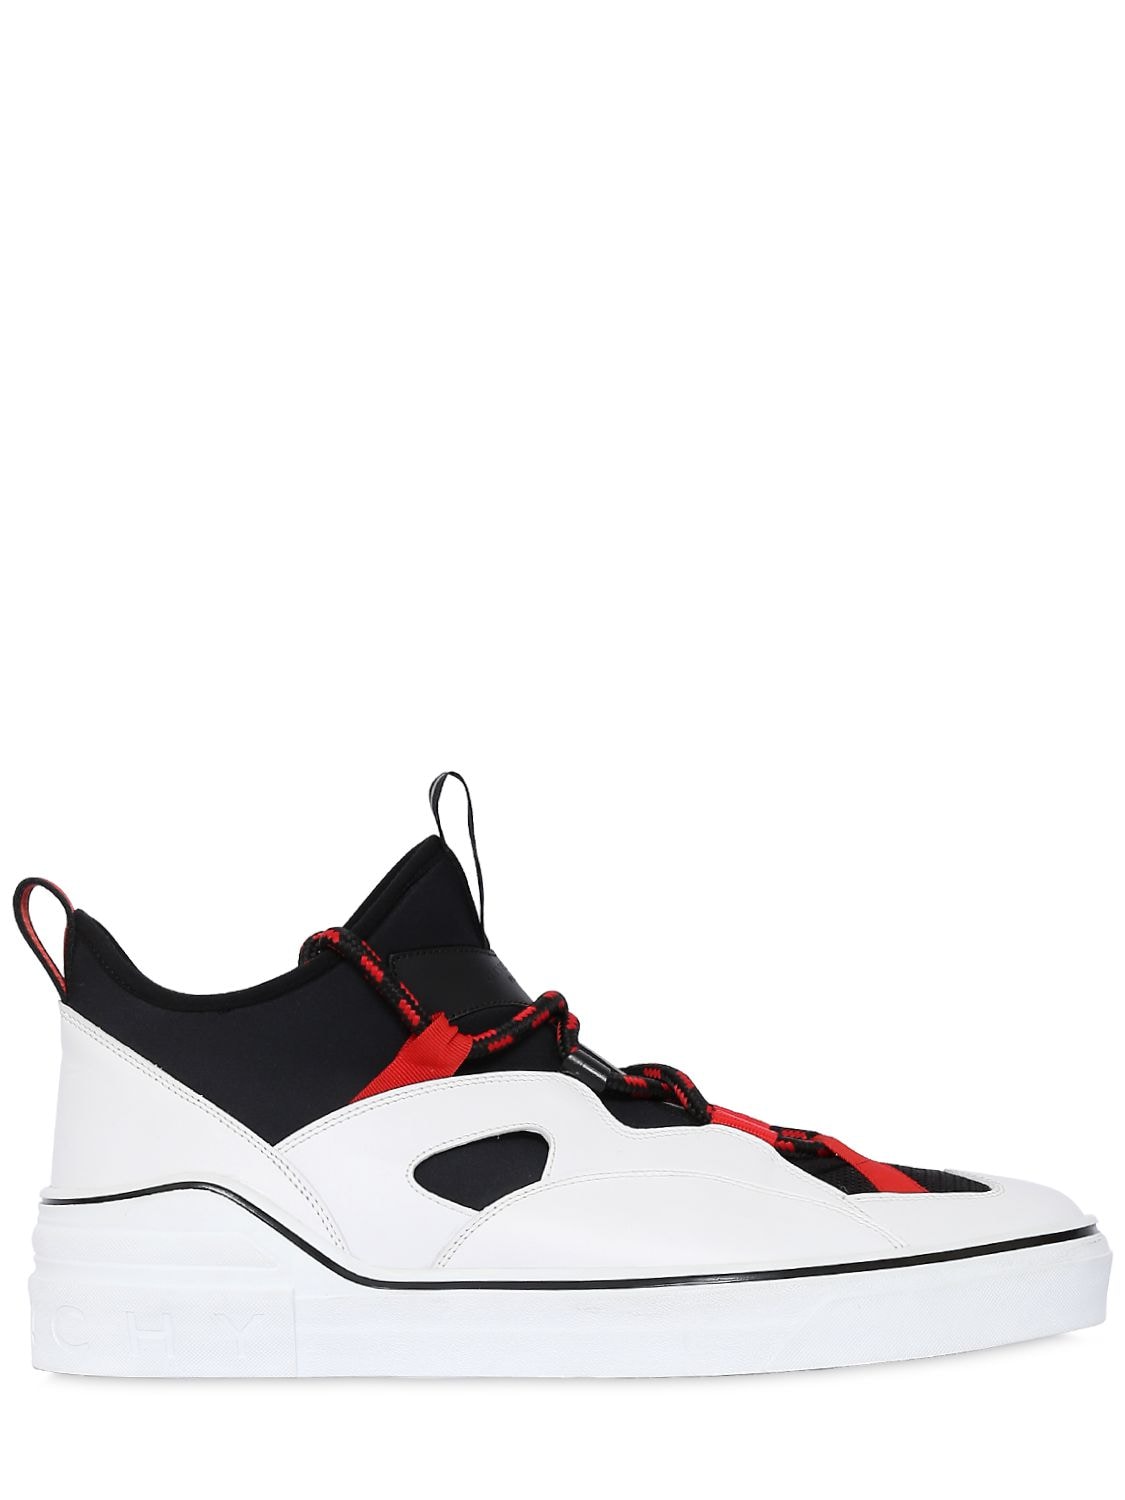 GIVENCHY GEORGE V NEOPRENE & LEATHER SNEAKERS,67IL01011-MDA00